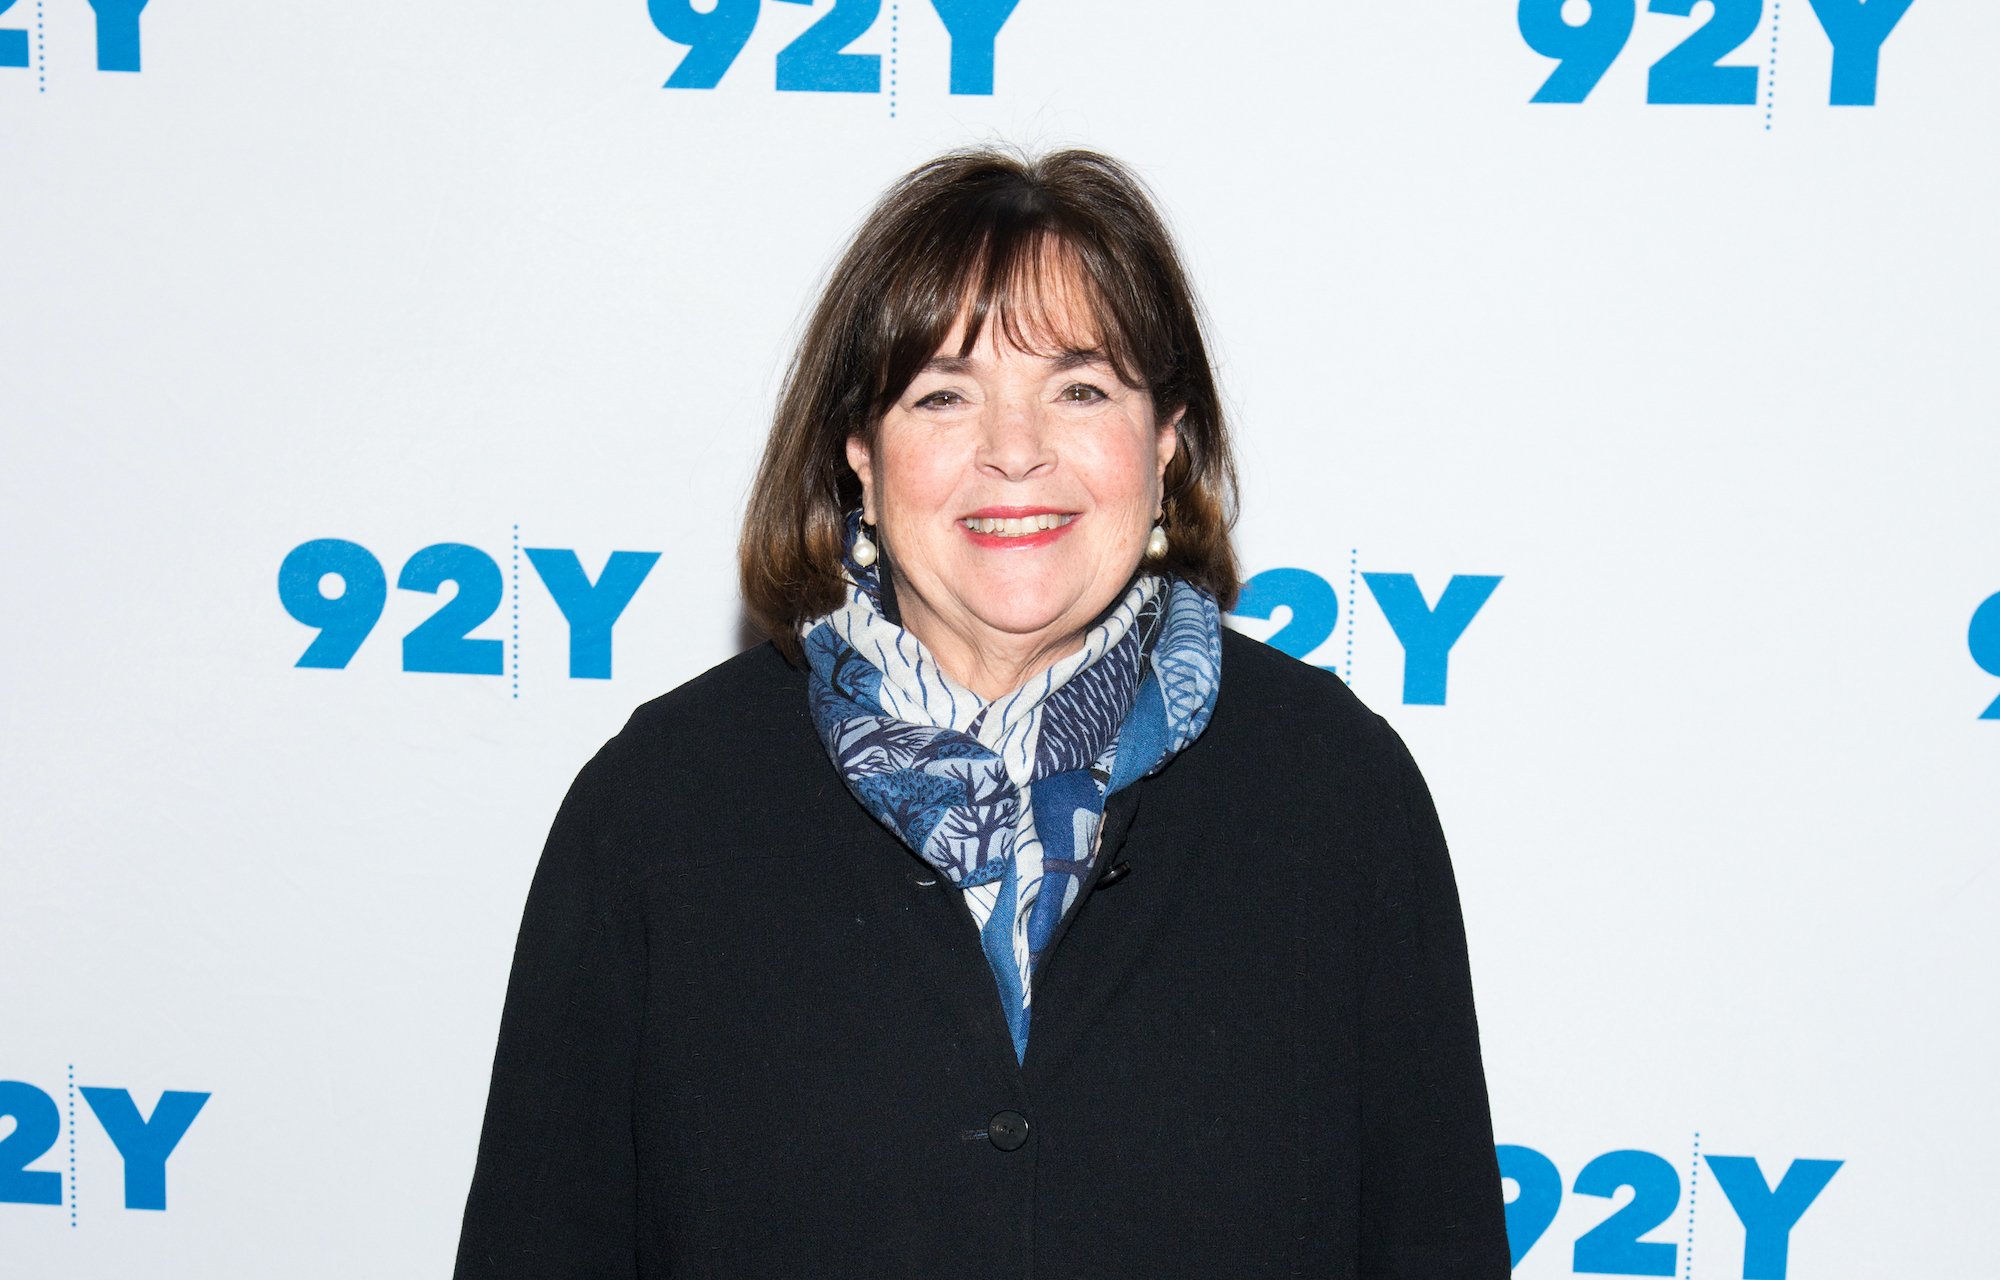 'Barefoot Contessa' host Ina Garten smiles in front of a white background